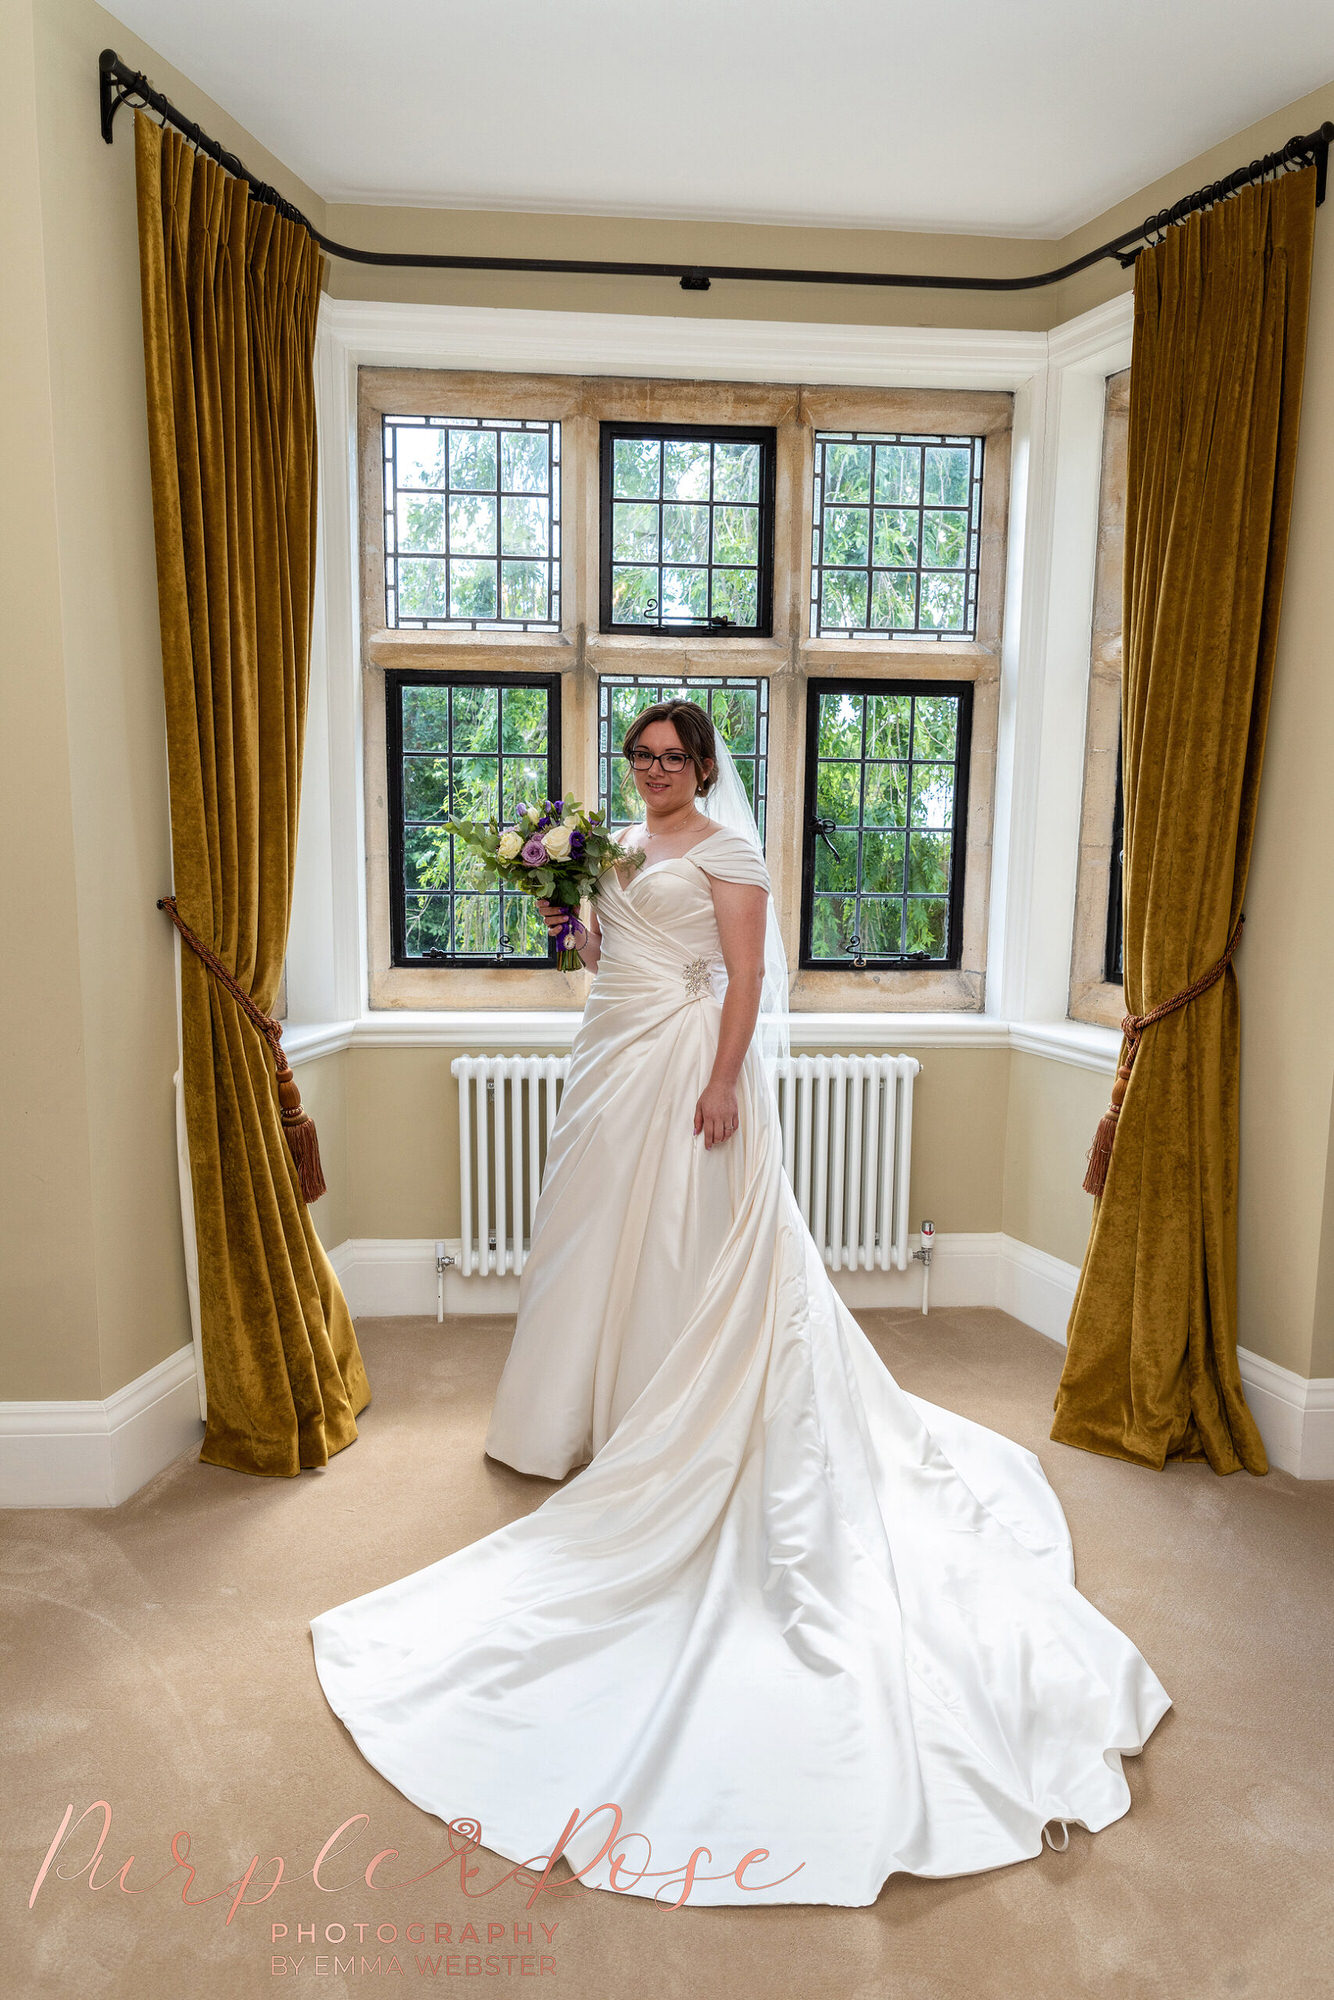 Bride stood in window with her wedding dress fanned out